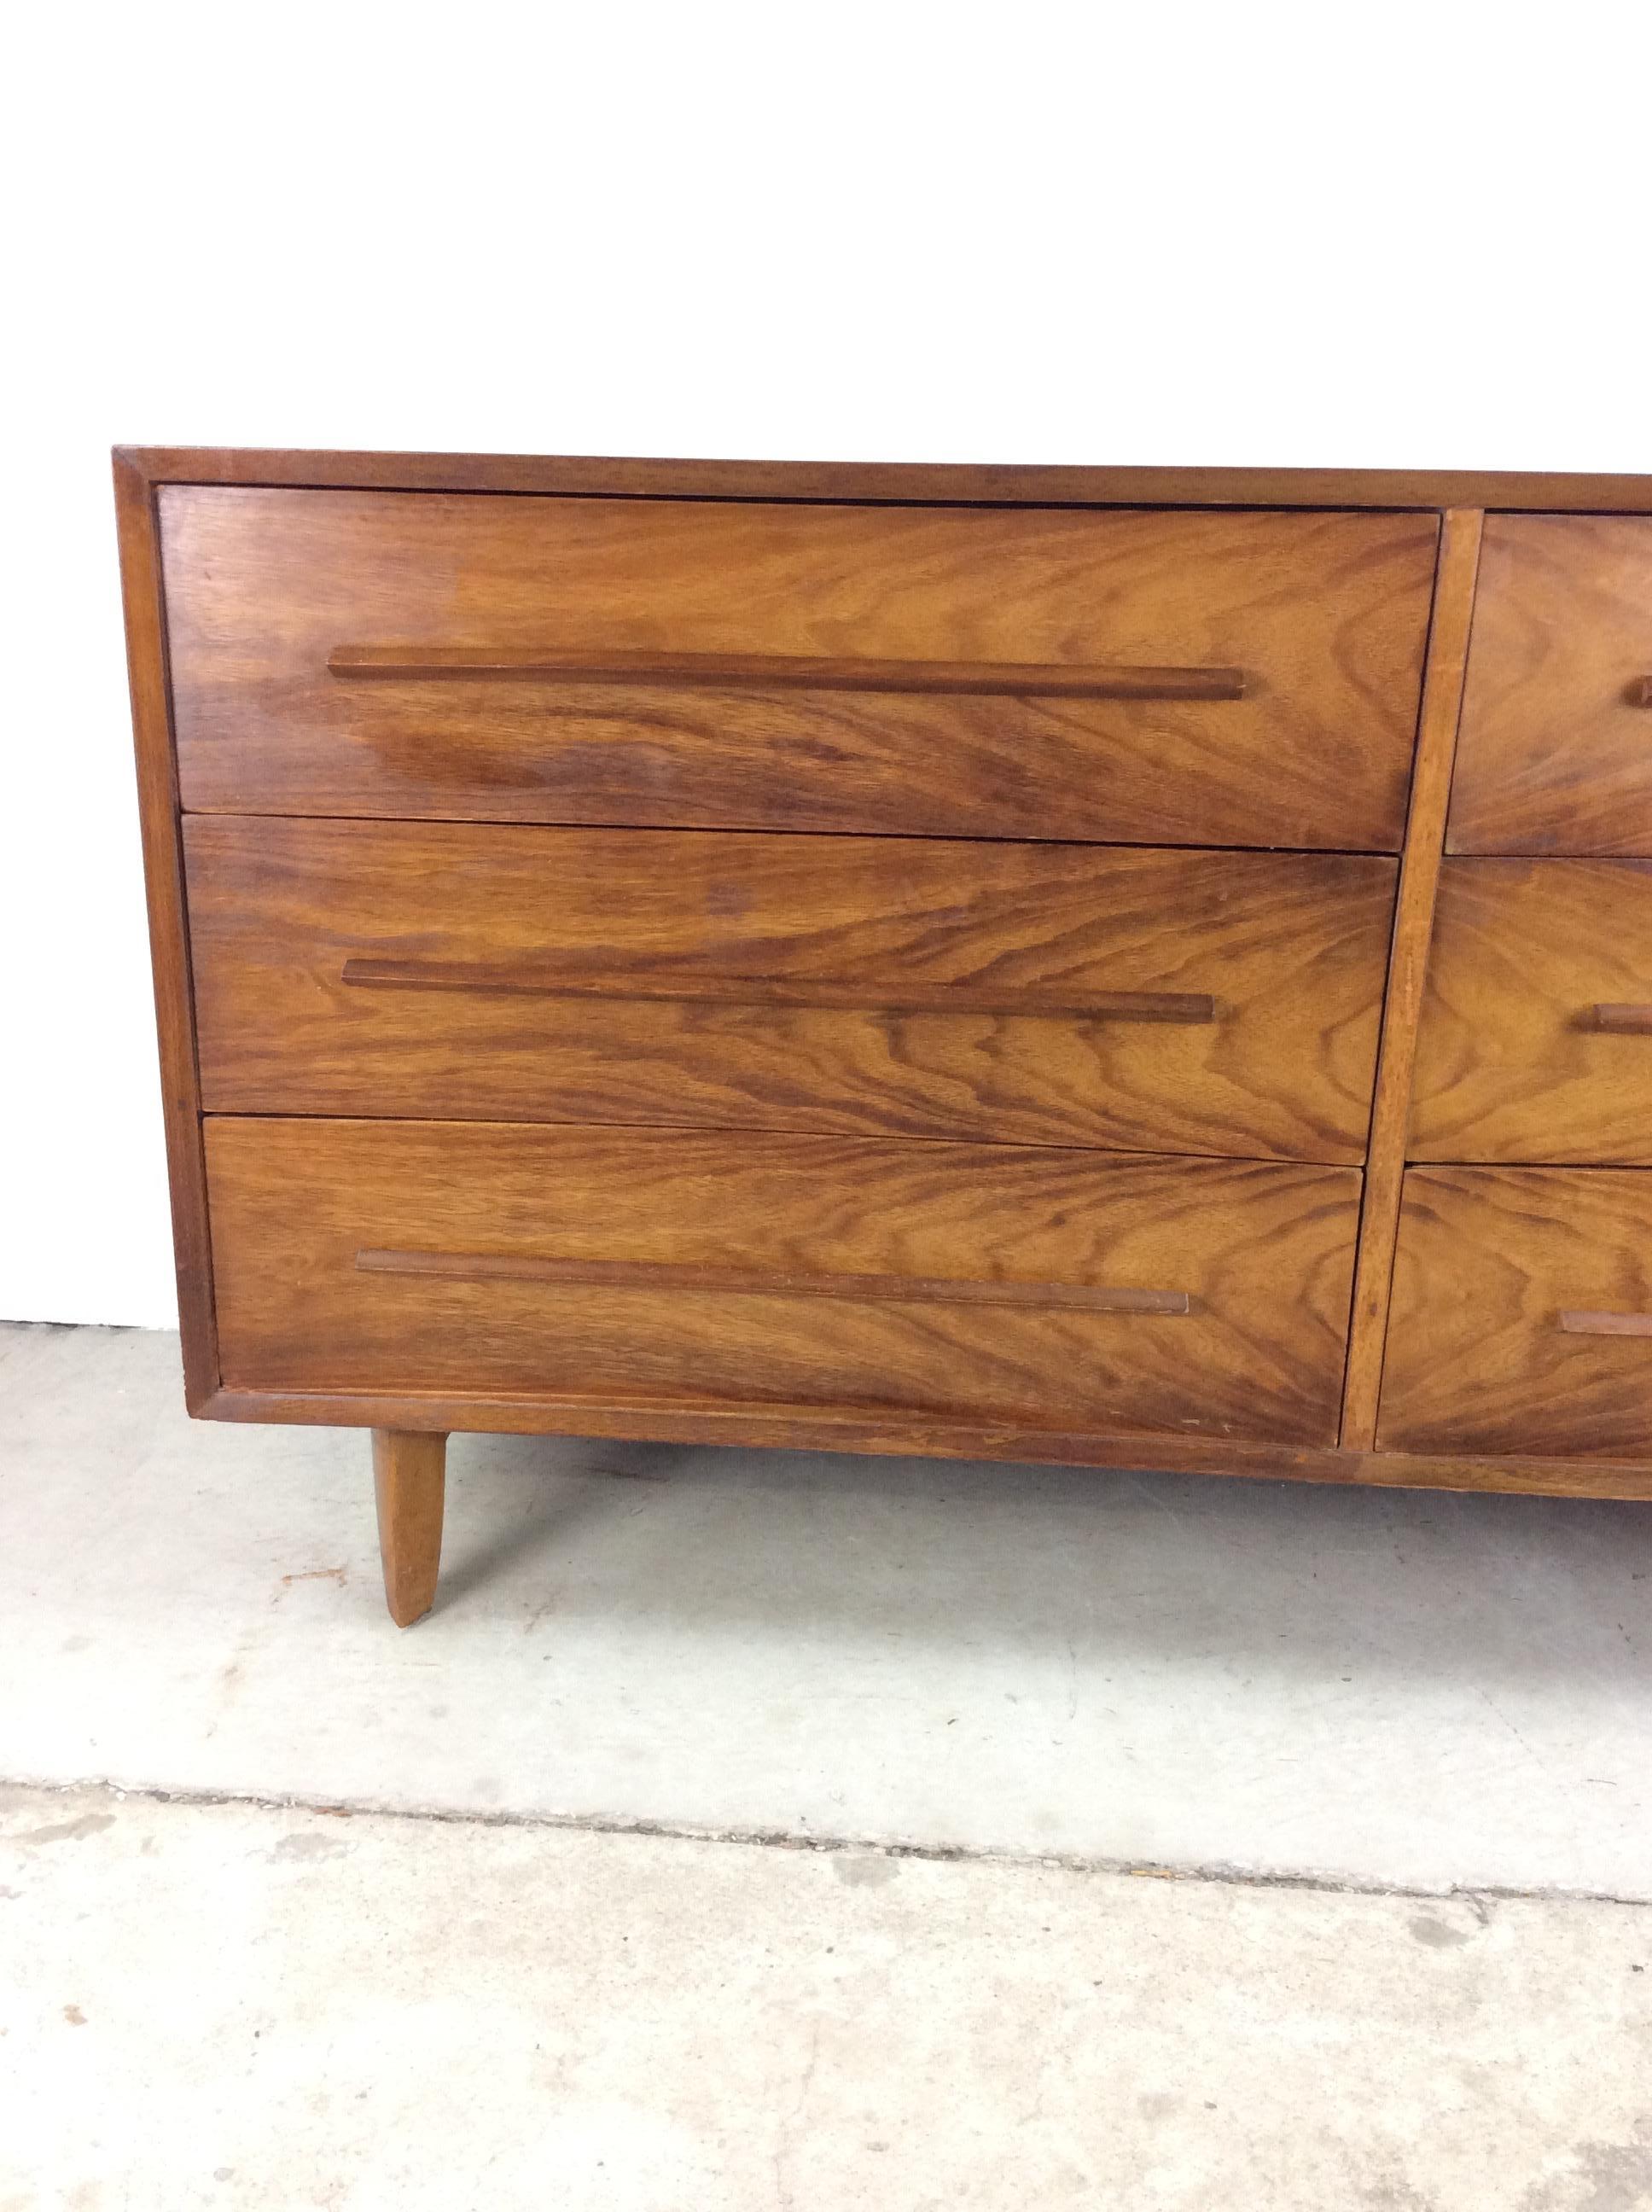 This mid century modern lowboy dresser by Widdicomb features hardwood construction, beautiful walnut veneer with original finish, six dovetail drawers with sculpted wood pulls, and tall tapered legs.

Matching pair of nightstand & complimentary wall